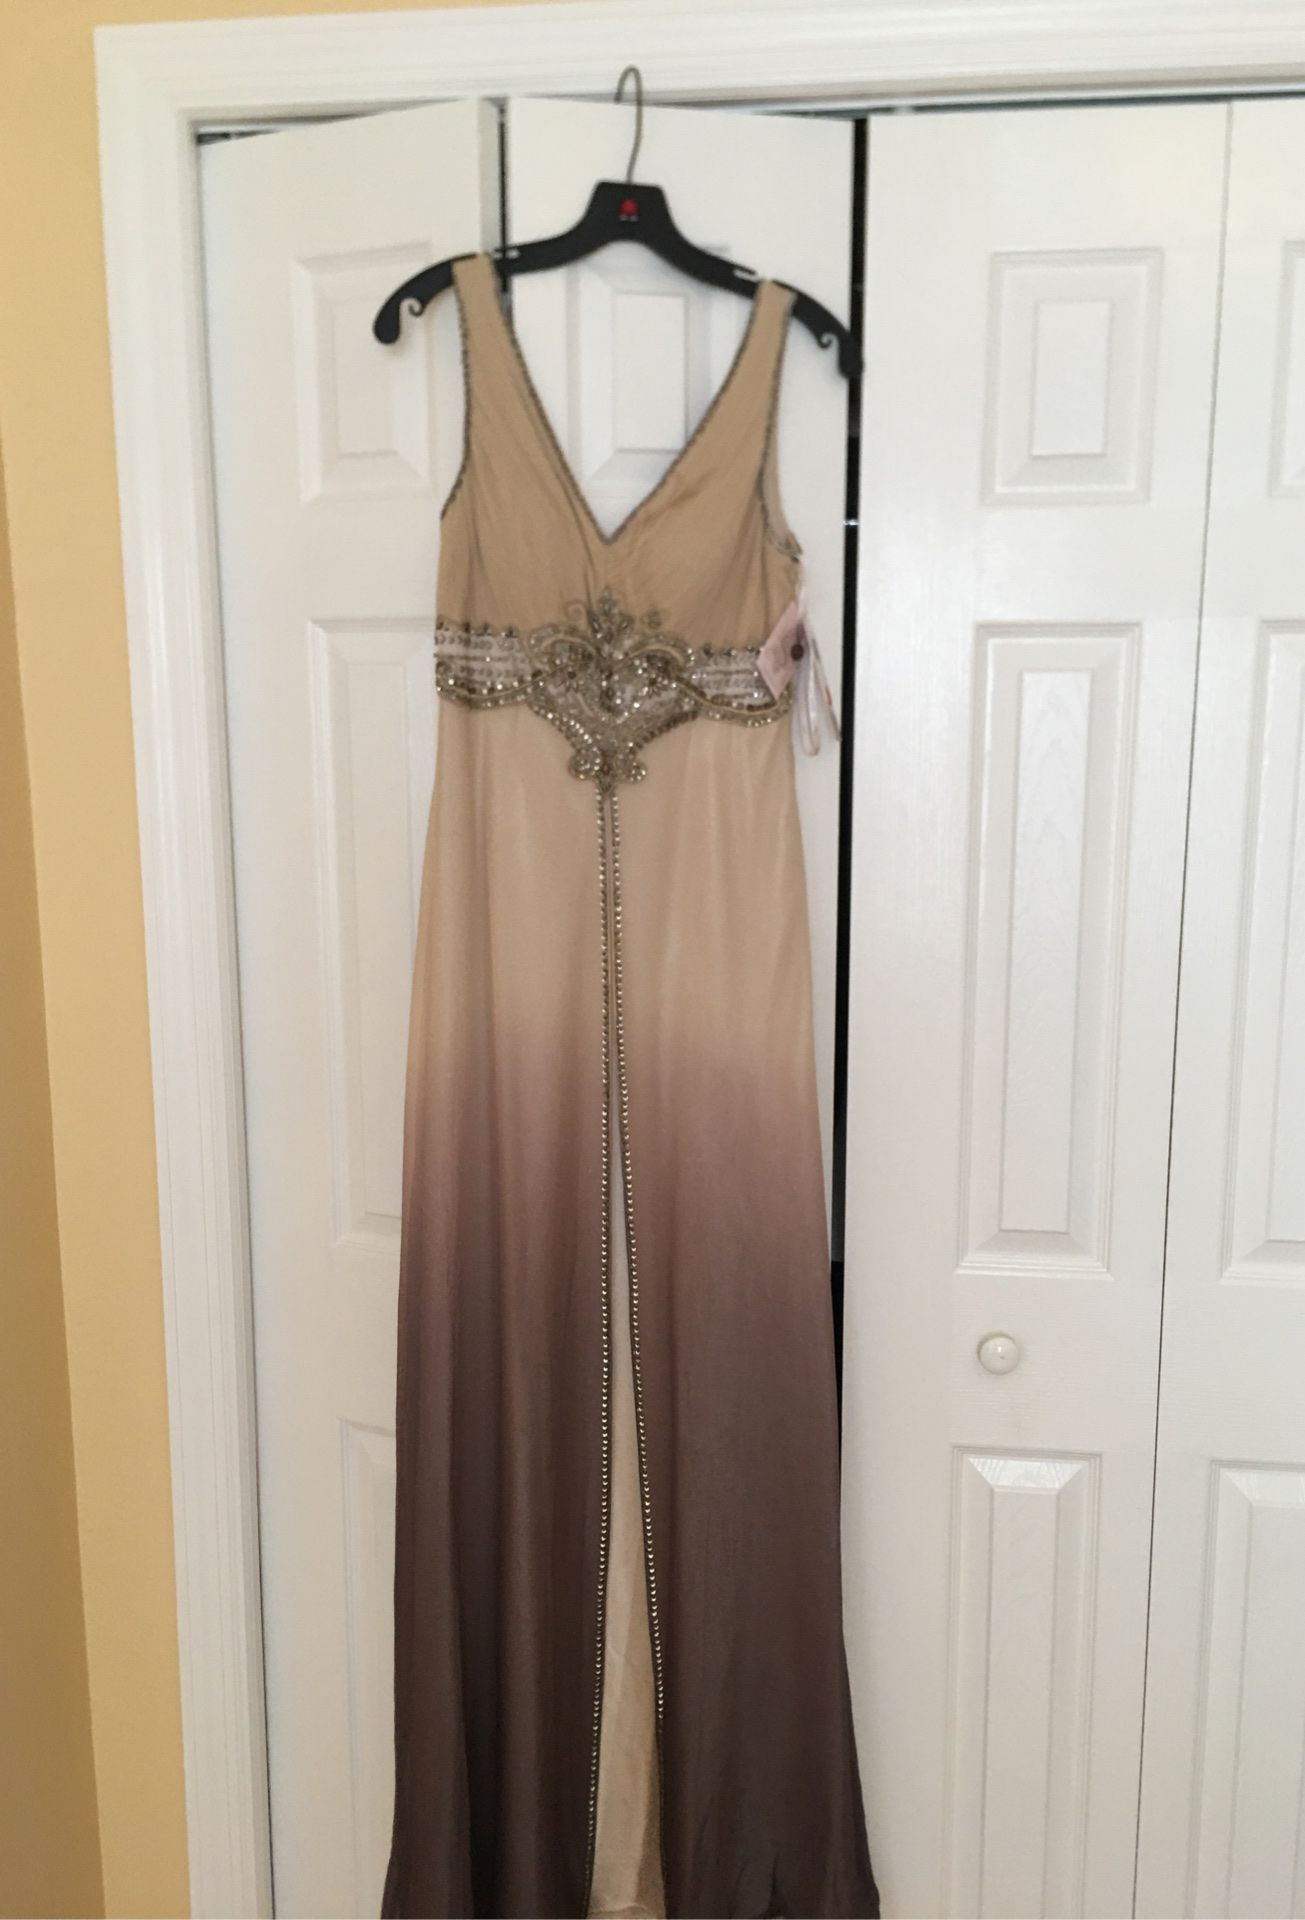 Designer Sue Wong ombré evening gown size 4. Beautiful delicate bead work on front and back . Front slit exposes a champagne colored under piece.